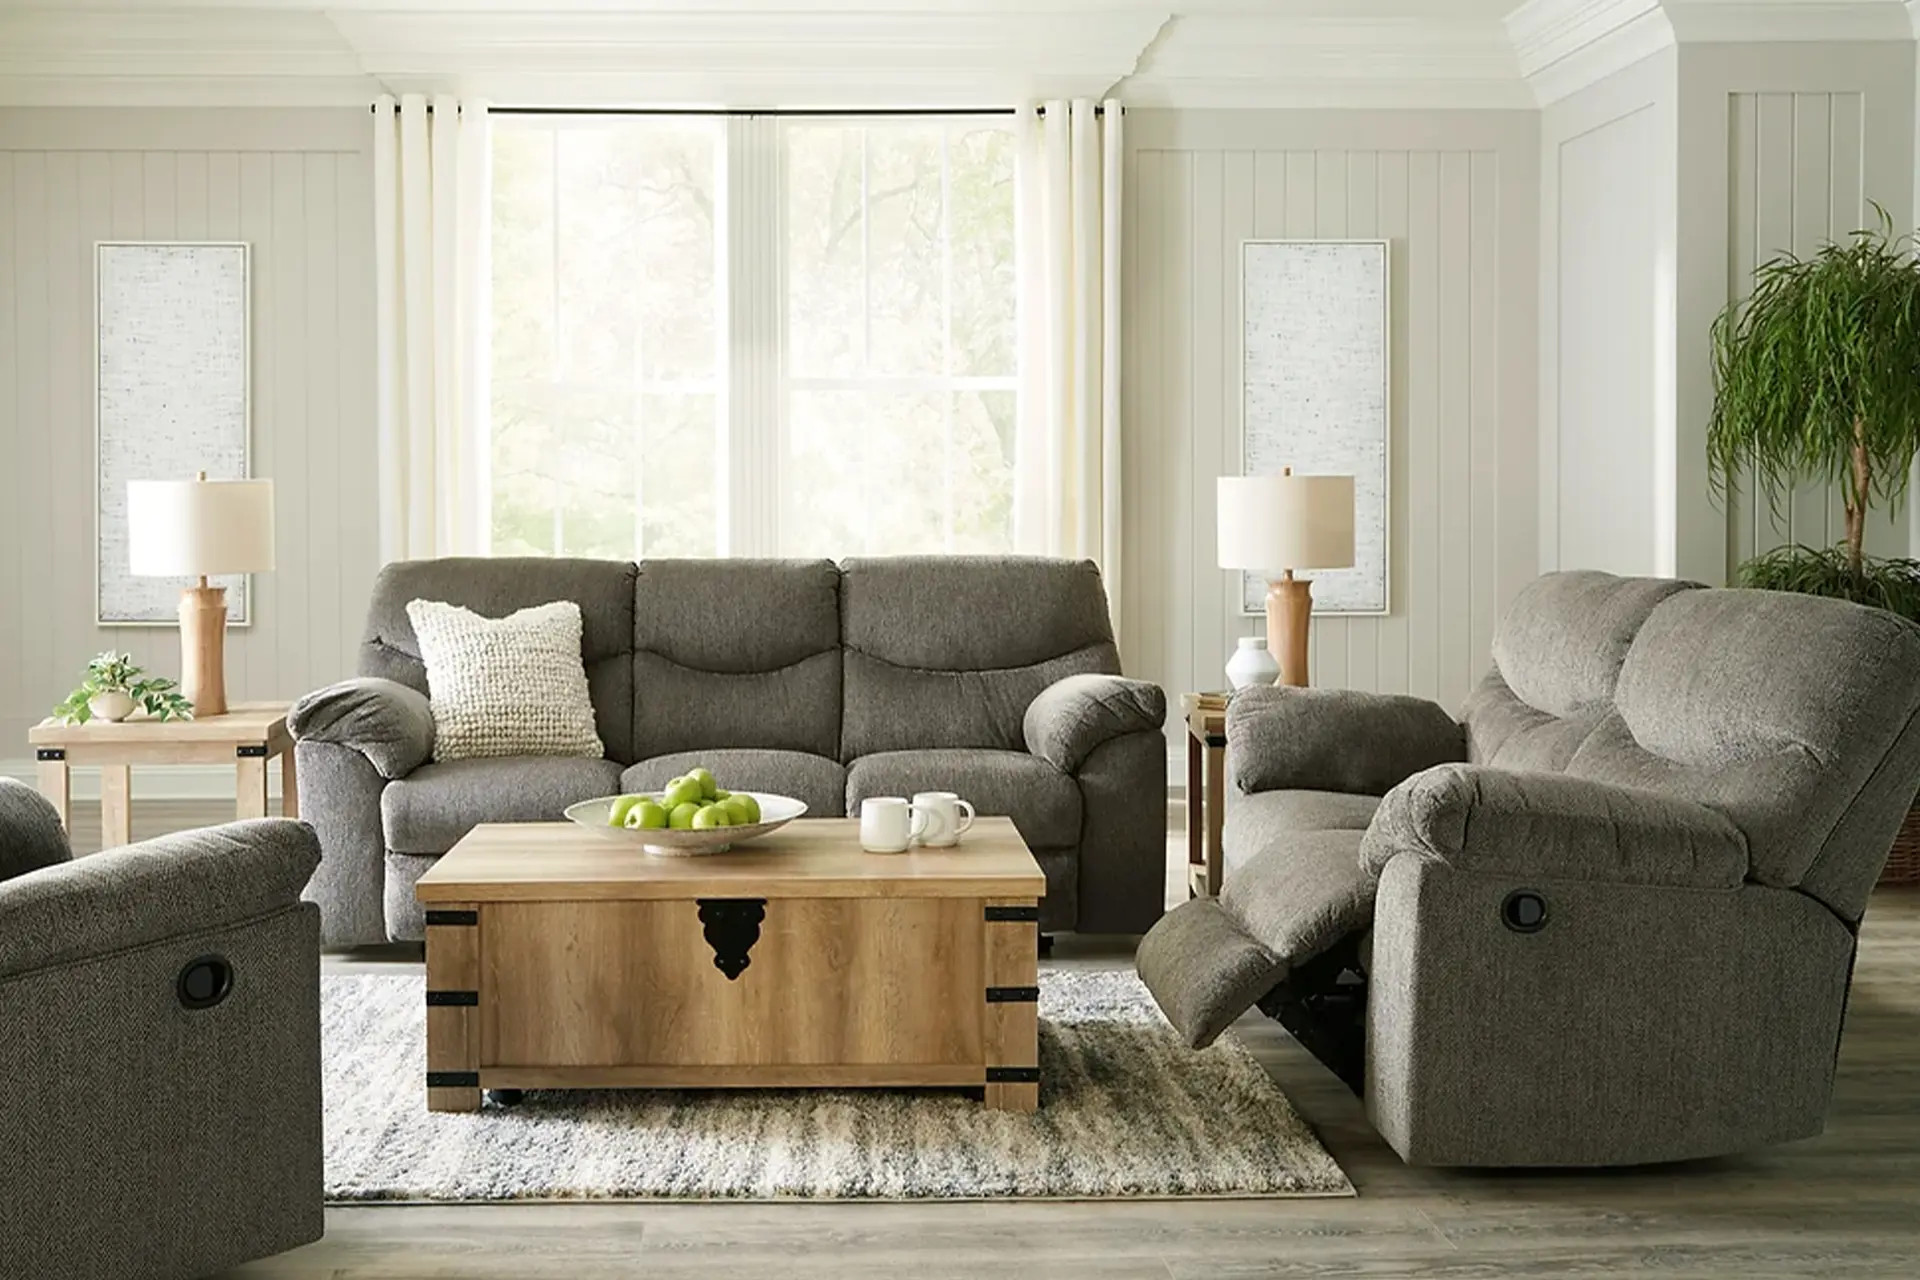 Alphons Putty Reclining Sofa, Love, and Recliner.